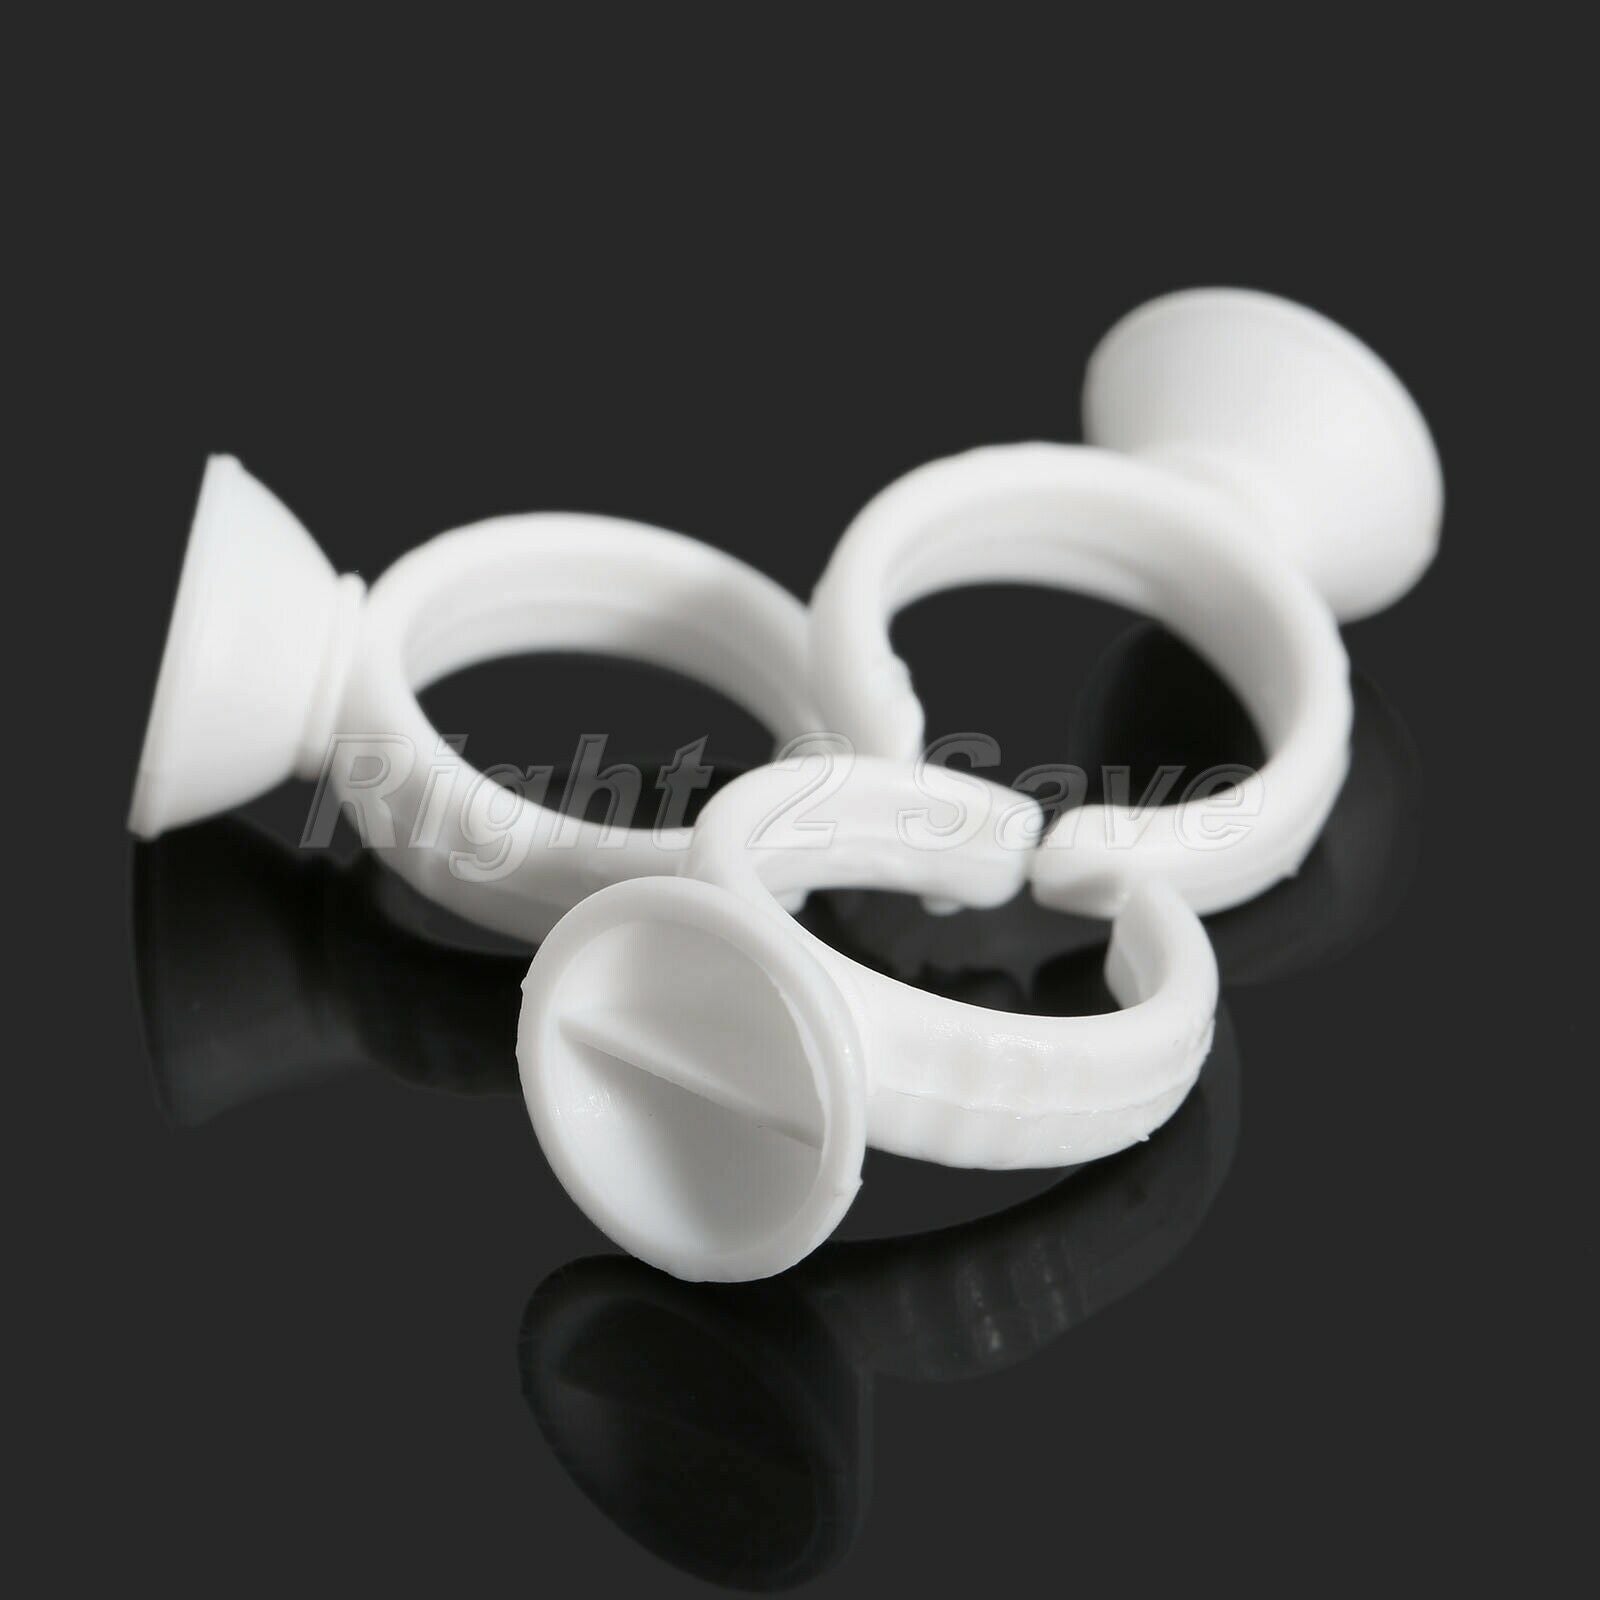 50Pcs Plastic Tattoo Ink Holder Rings For Eyebrow Lips Permanent Makeup Pigment